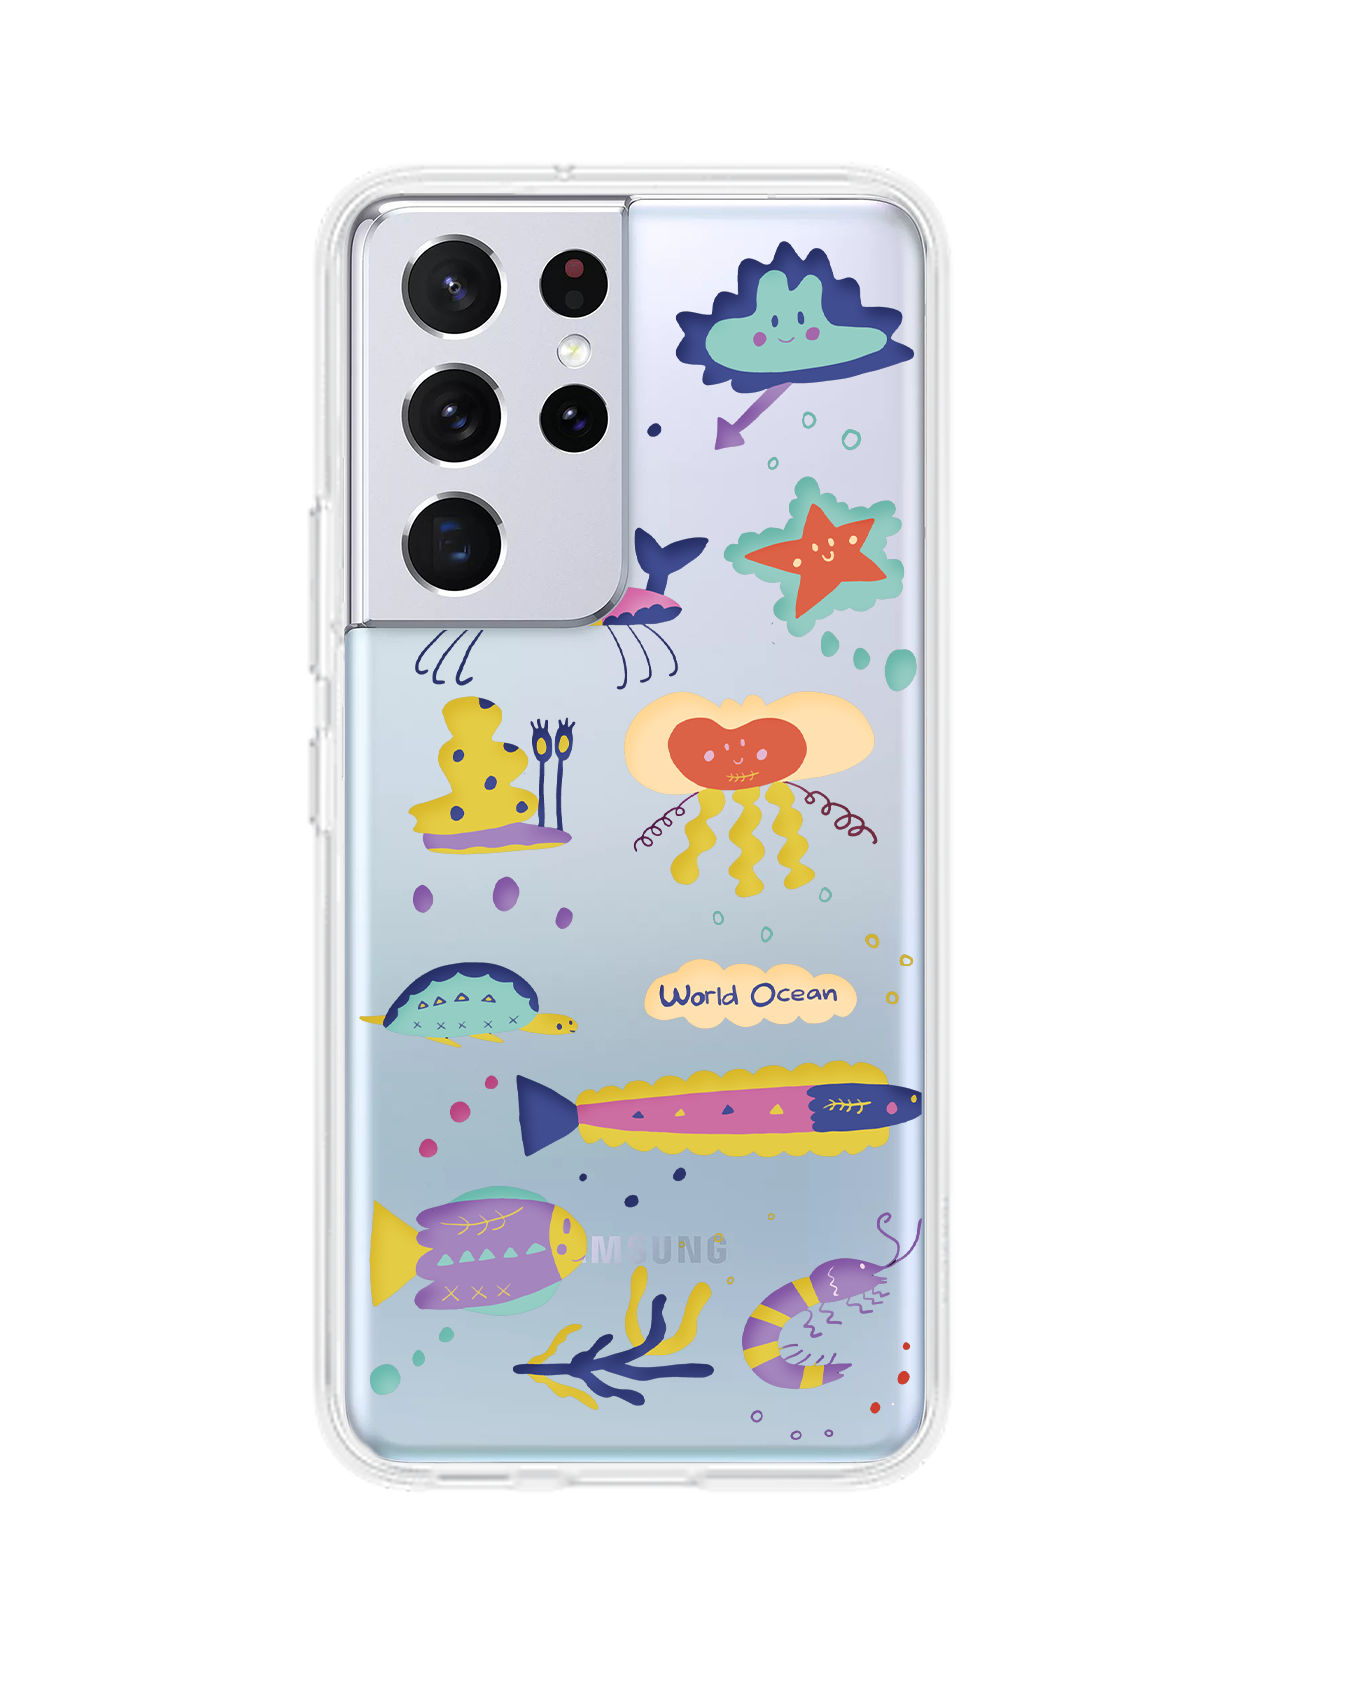 Android Rearguard Hybrid Case - Ocean World